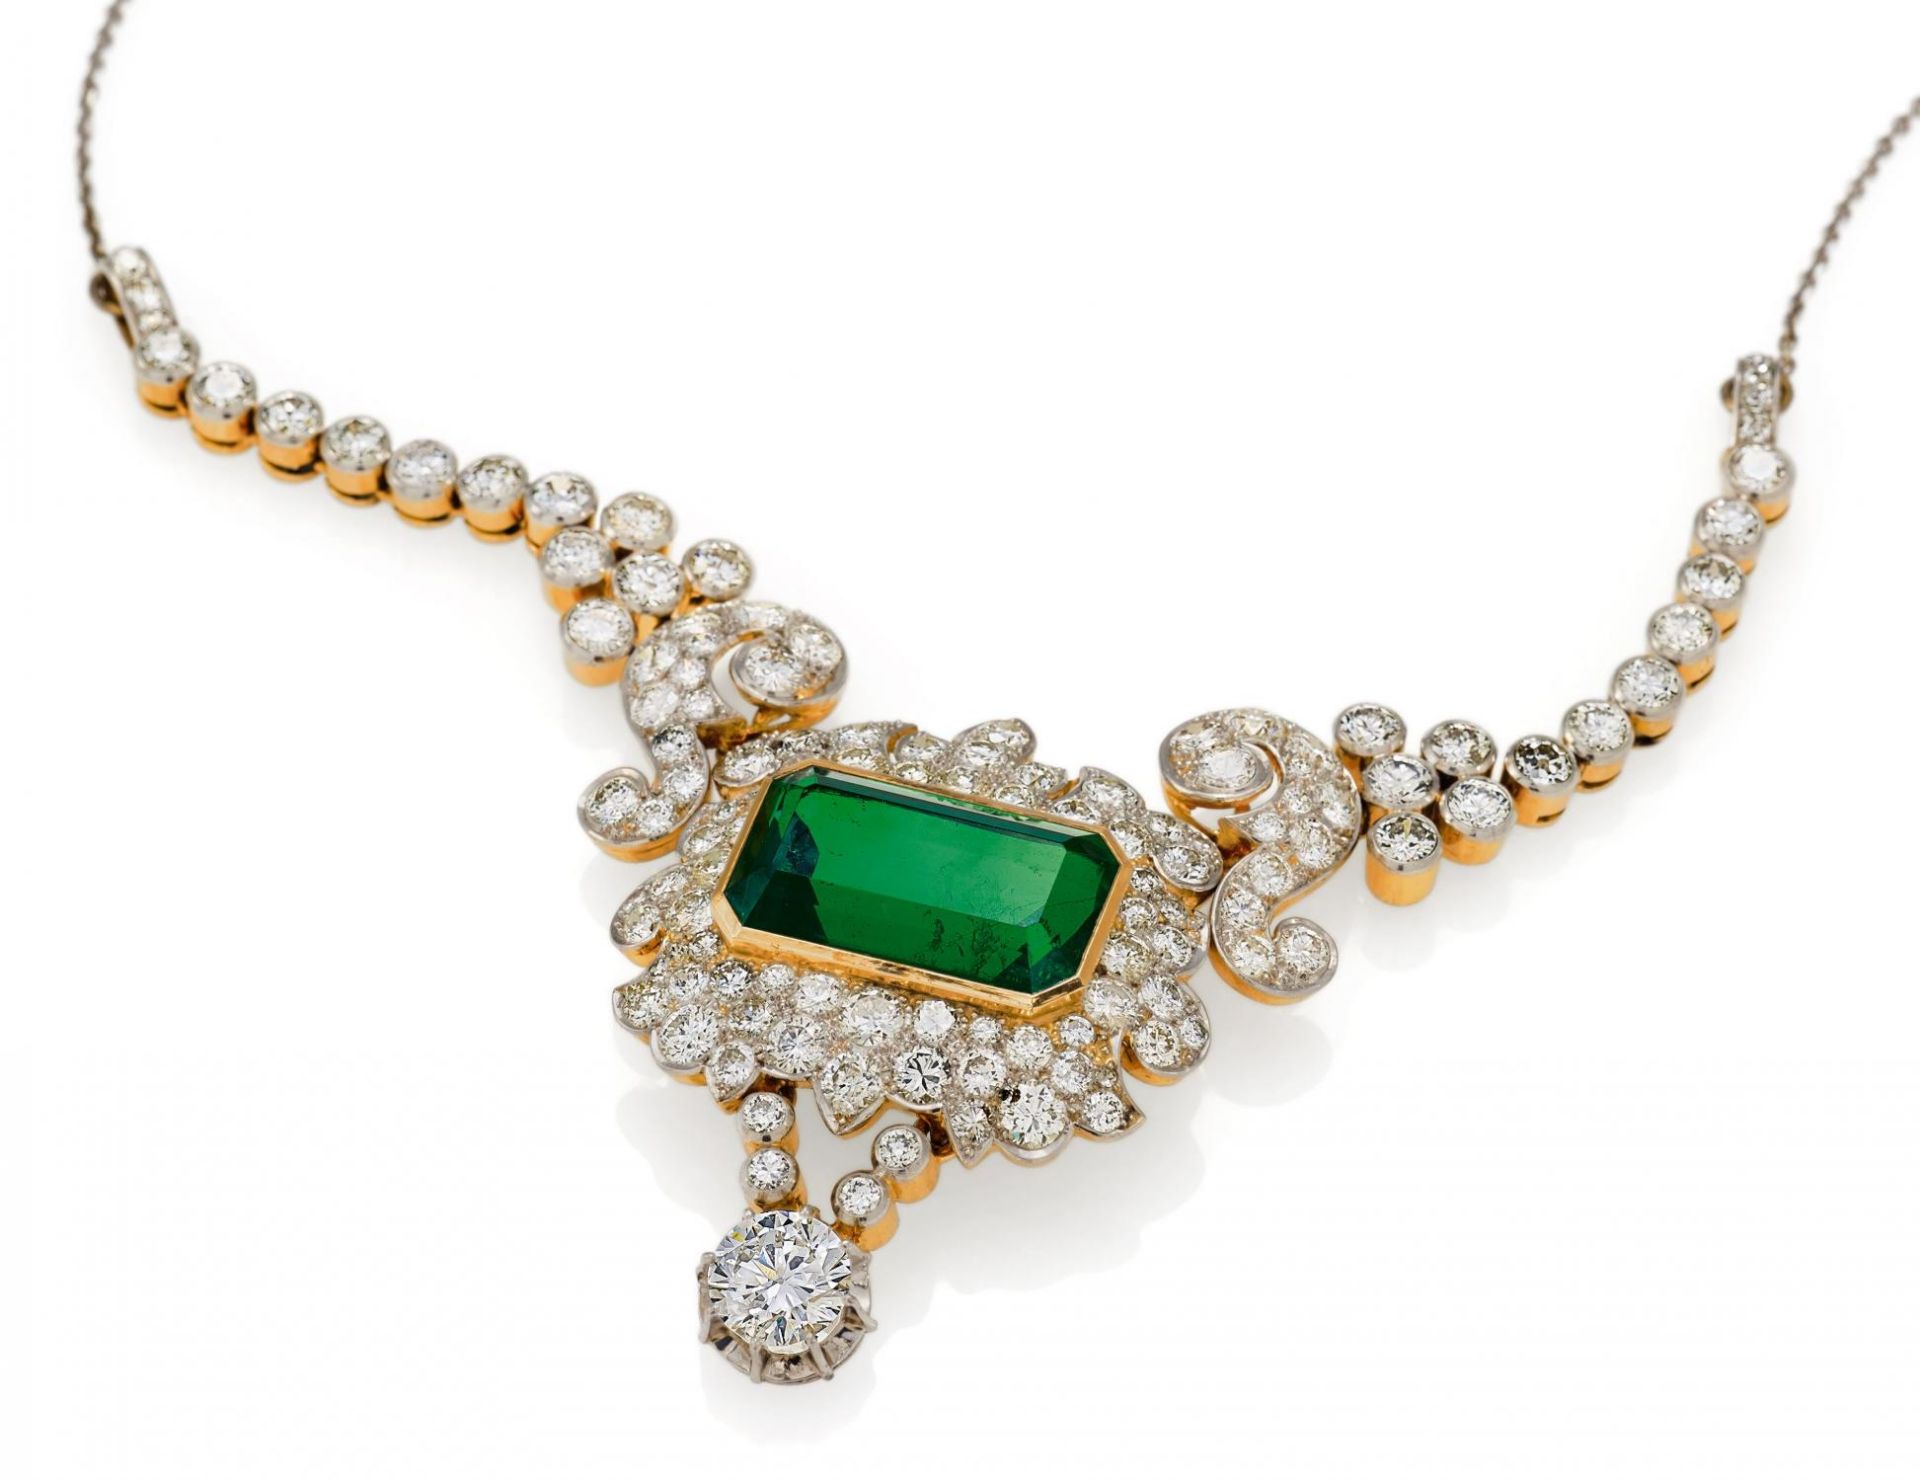 GEMSTONE-DIAMOND-PENDANT NECKLACE. Material: Platinum, 750/- yellow gold. Total Weight: 35,5 g.